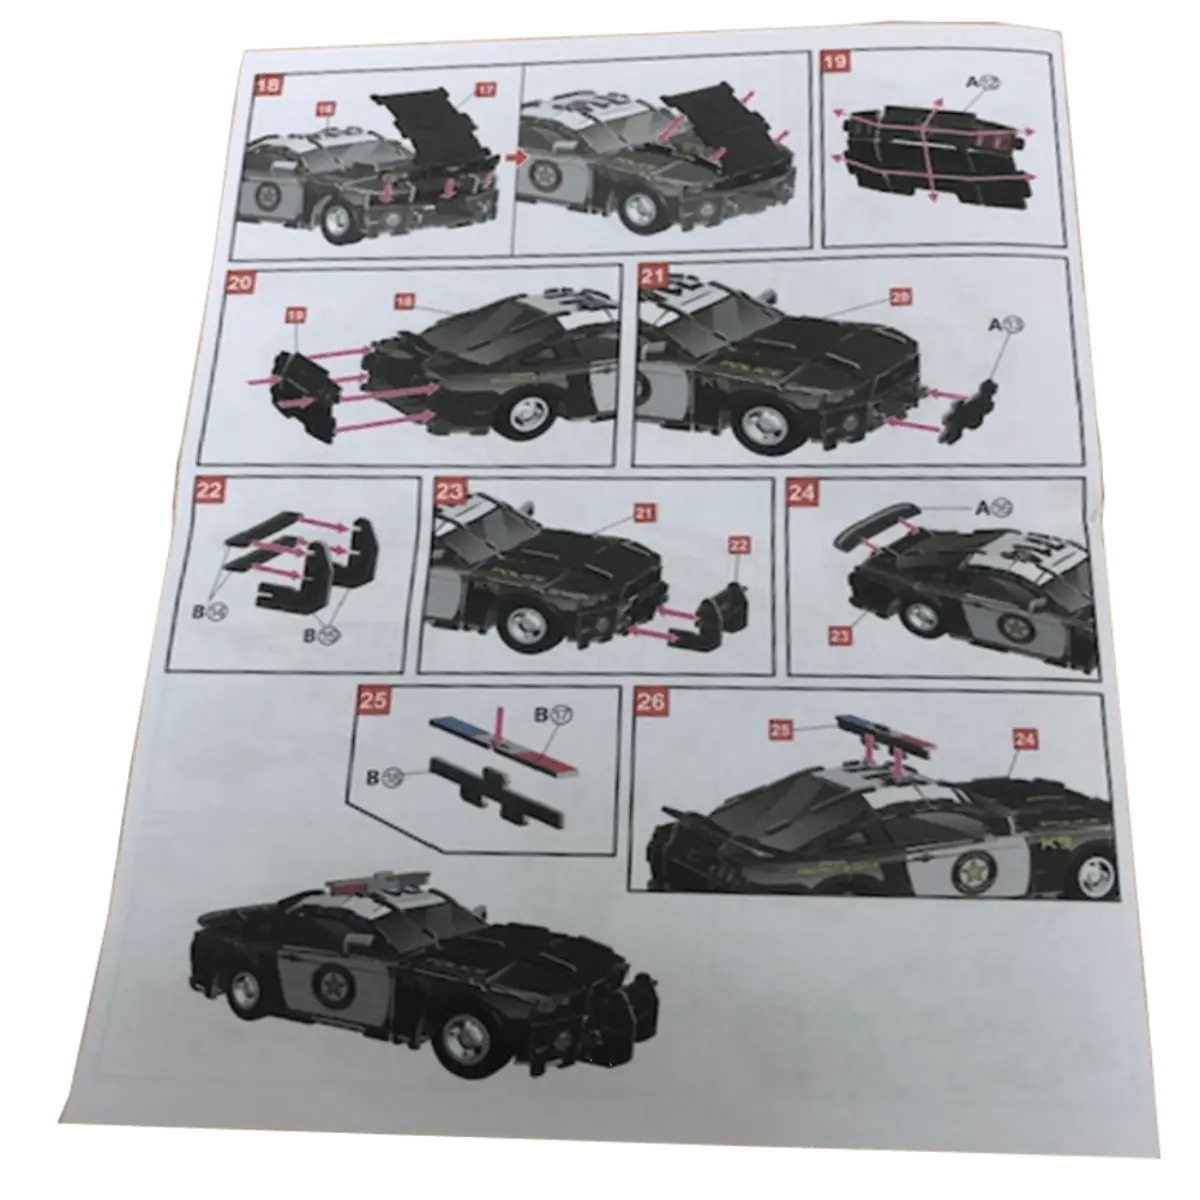 Car Jigsaw Puzzles in 3D Ford Mustang Police Vehicle Instructions